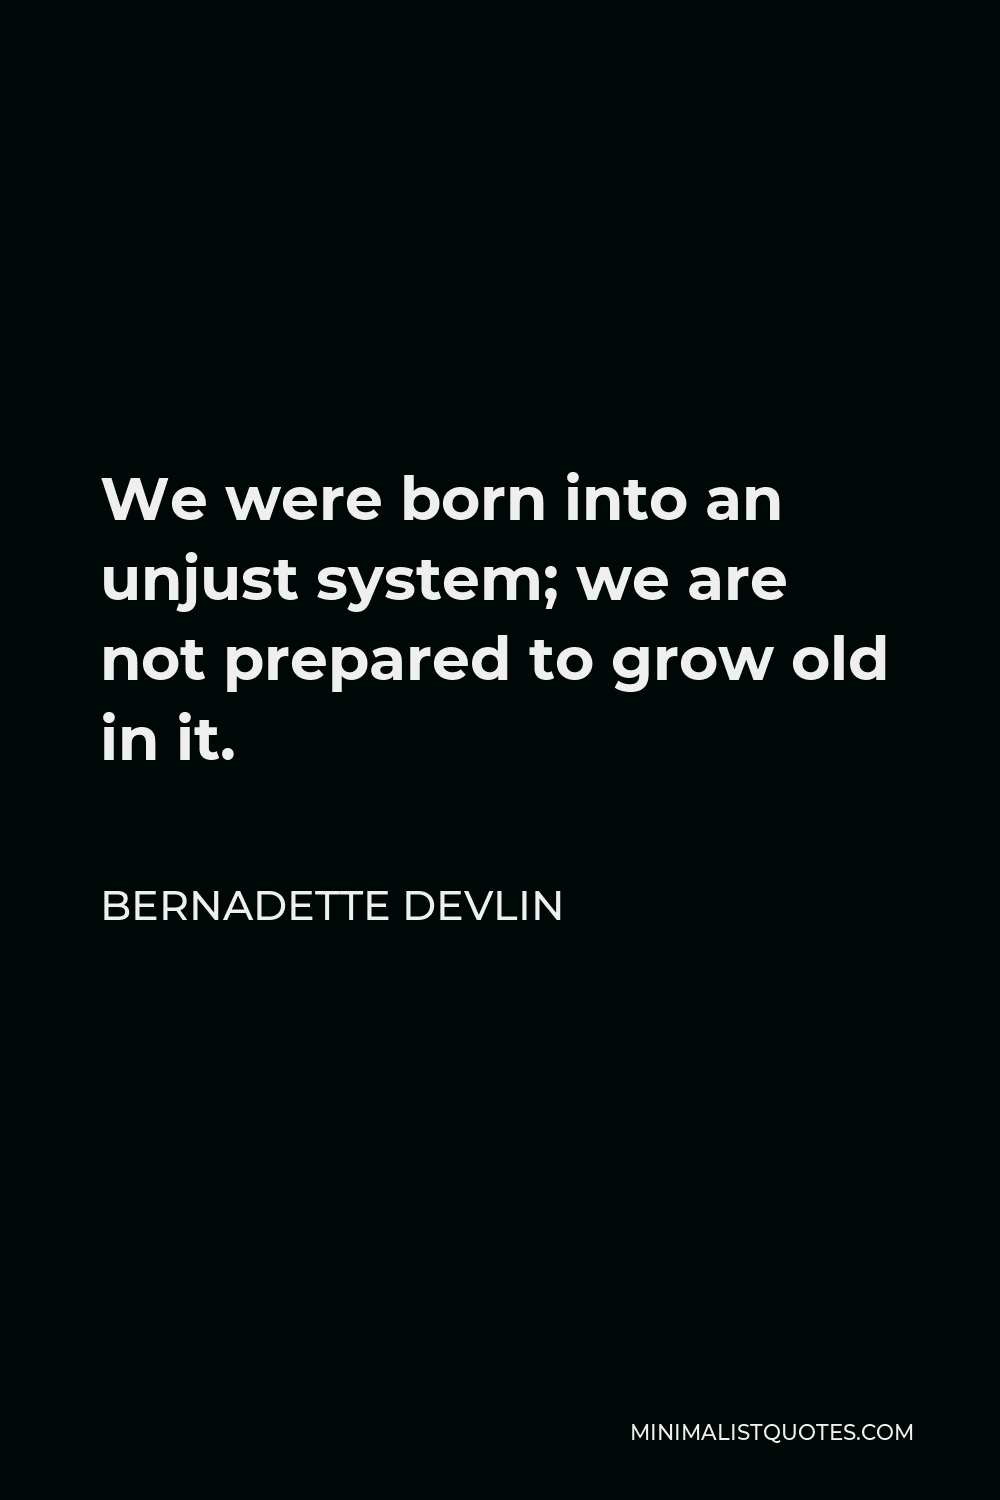 Bernadette Devlin Quote - We were born into an unjust system; we are not prepared to grow old in it.